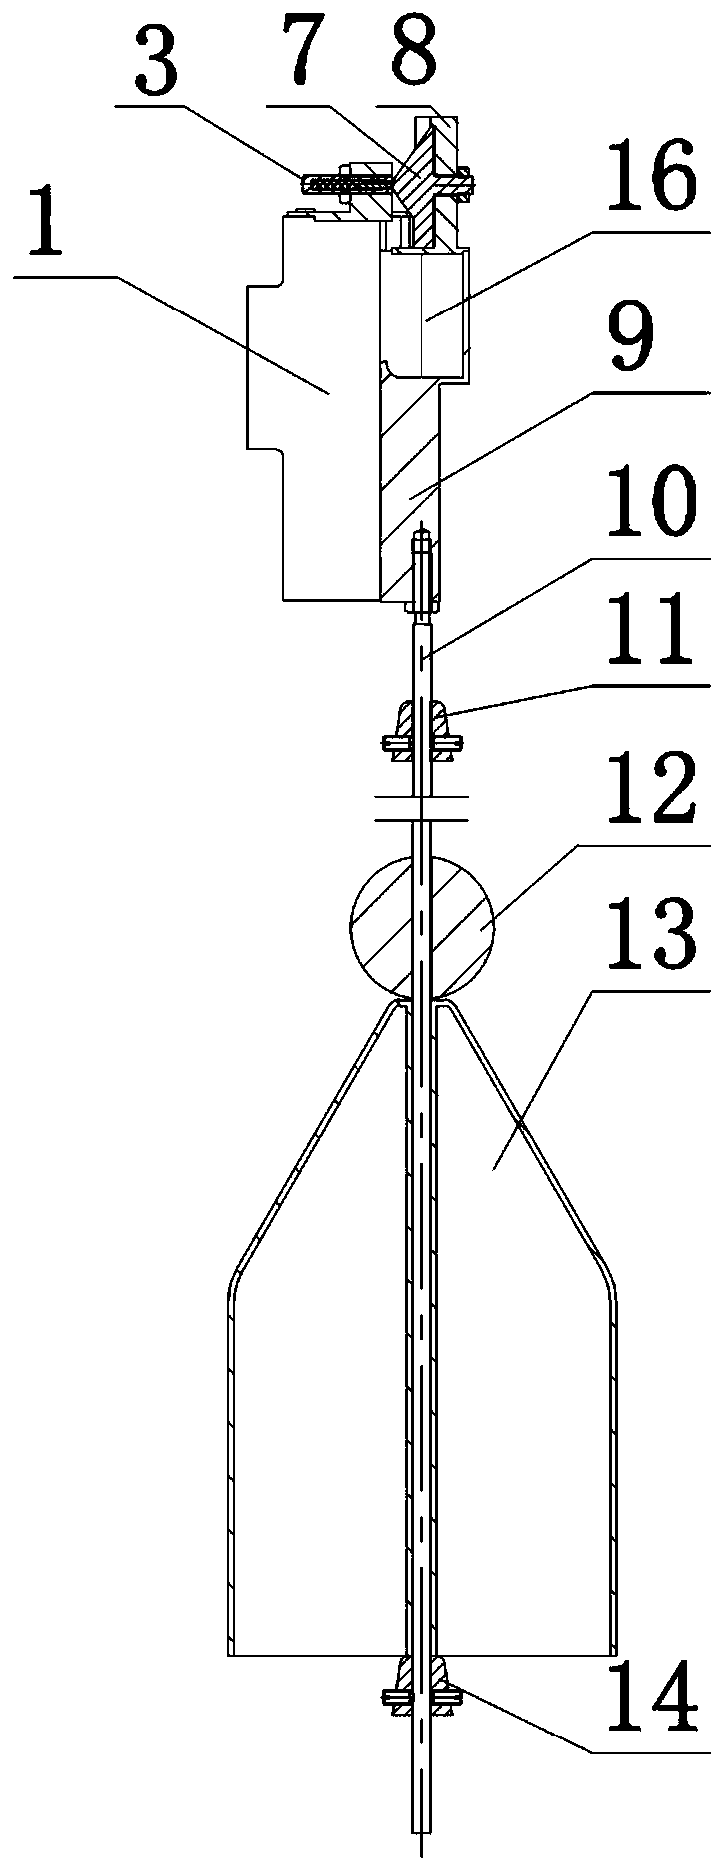 Suspension release weight device